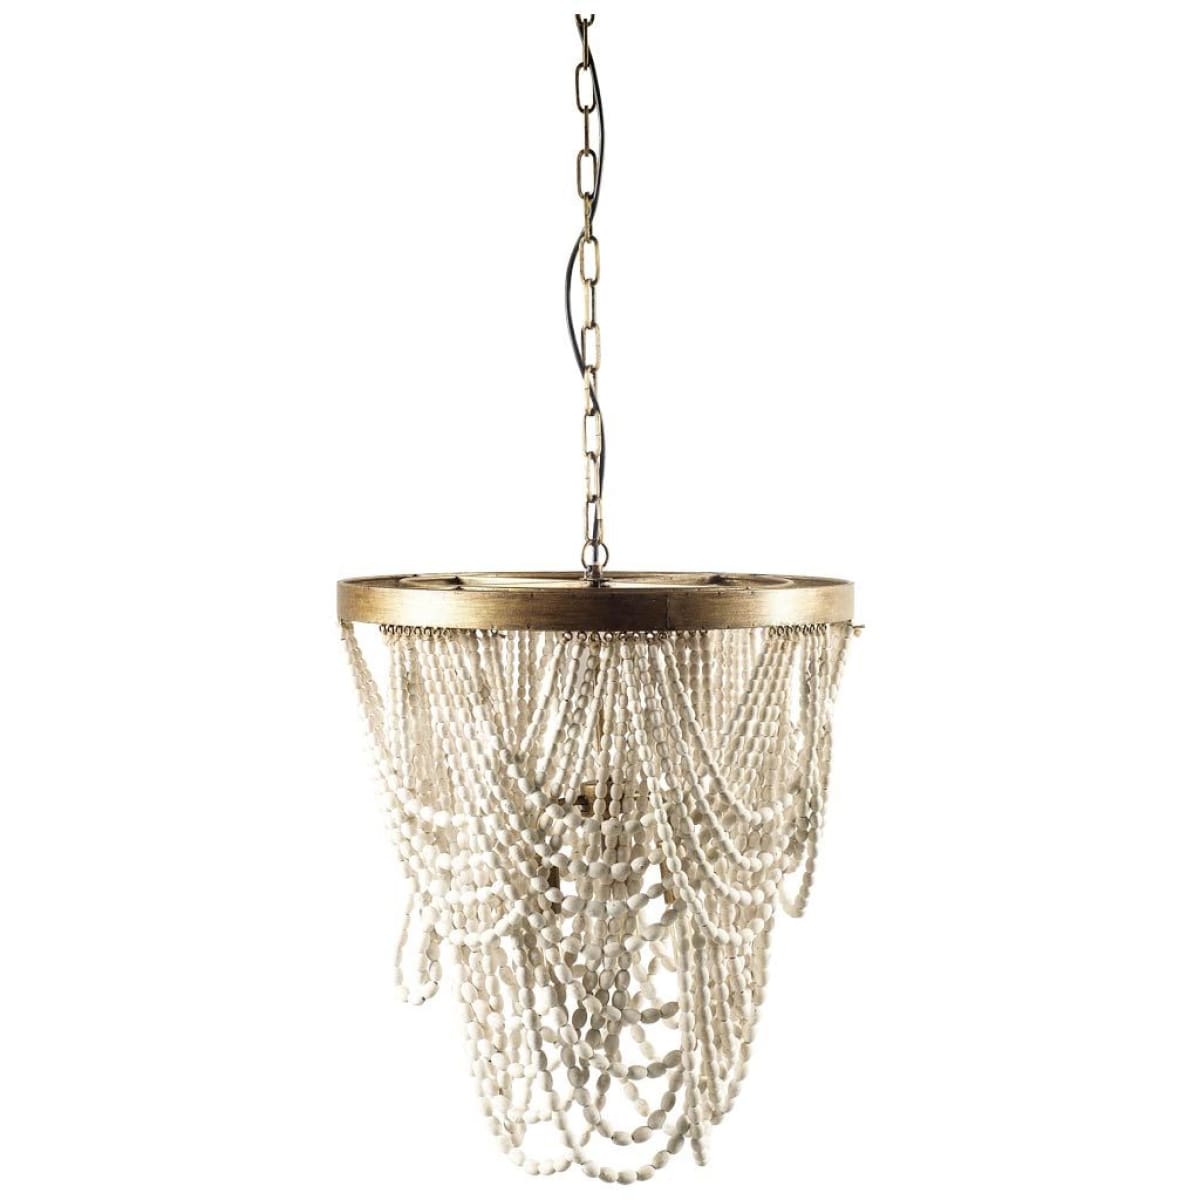 Pendra Chandelier Gold Metal | Whitewashed Wood - chandeliers